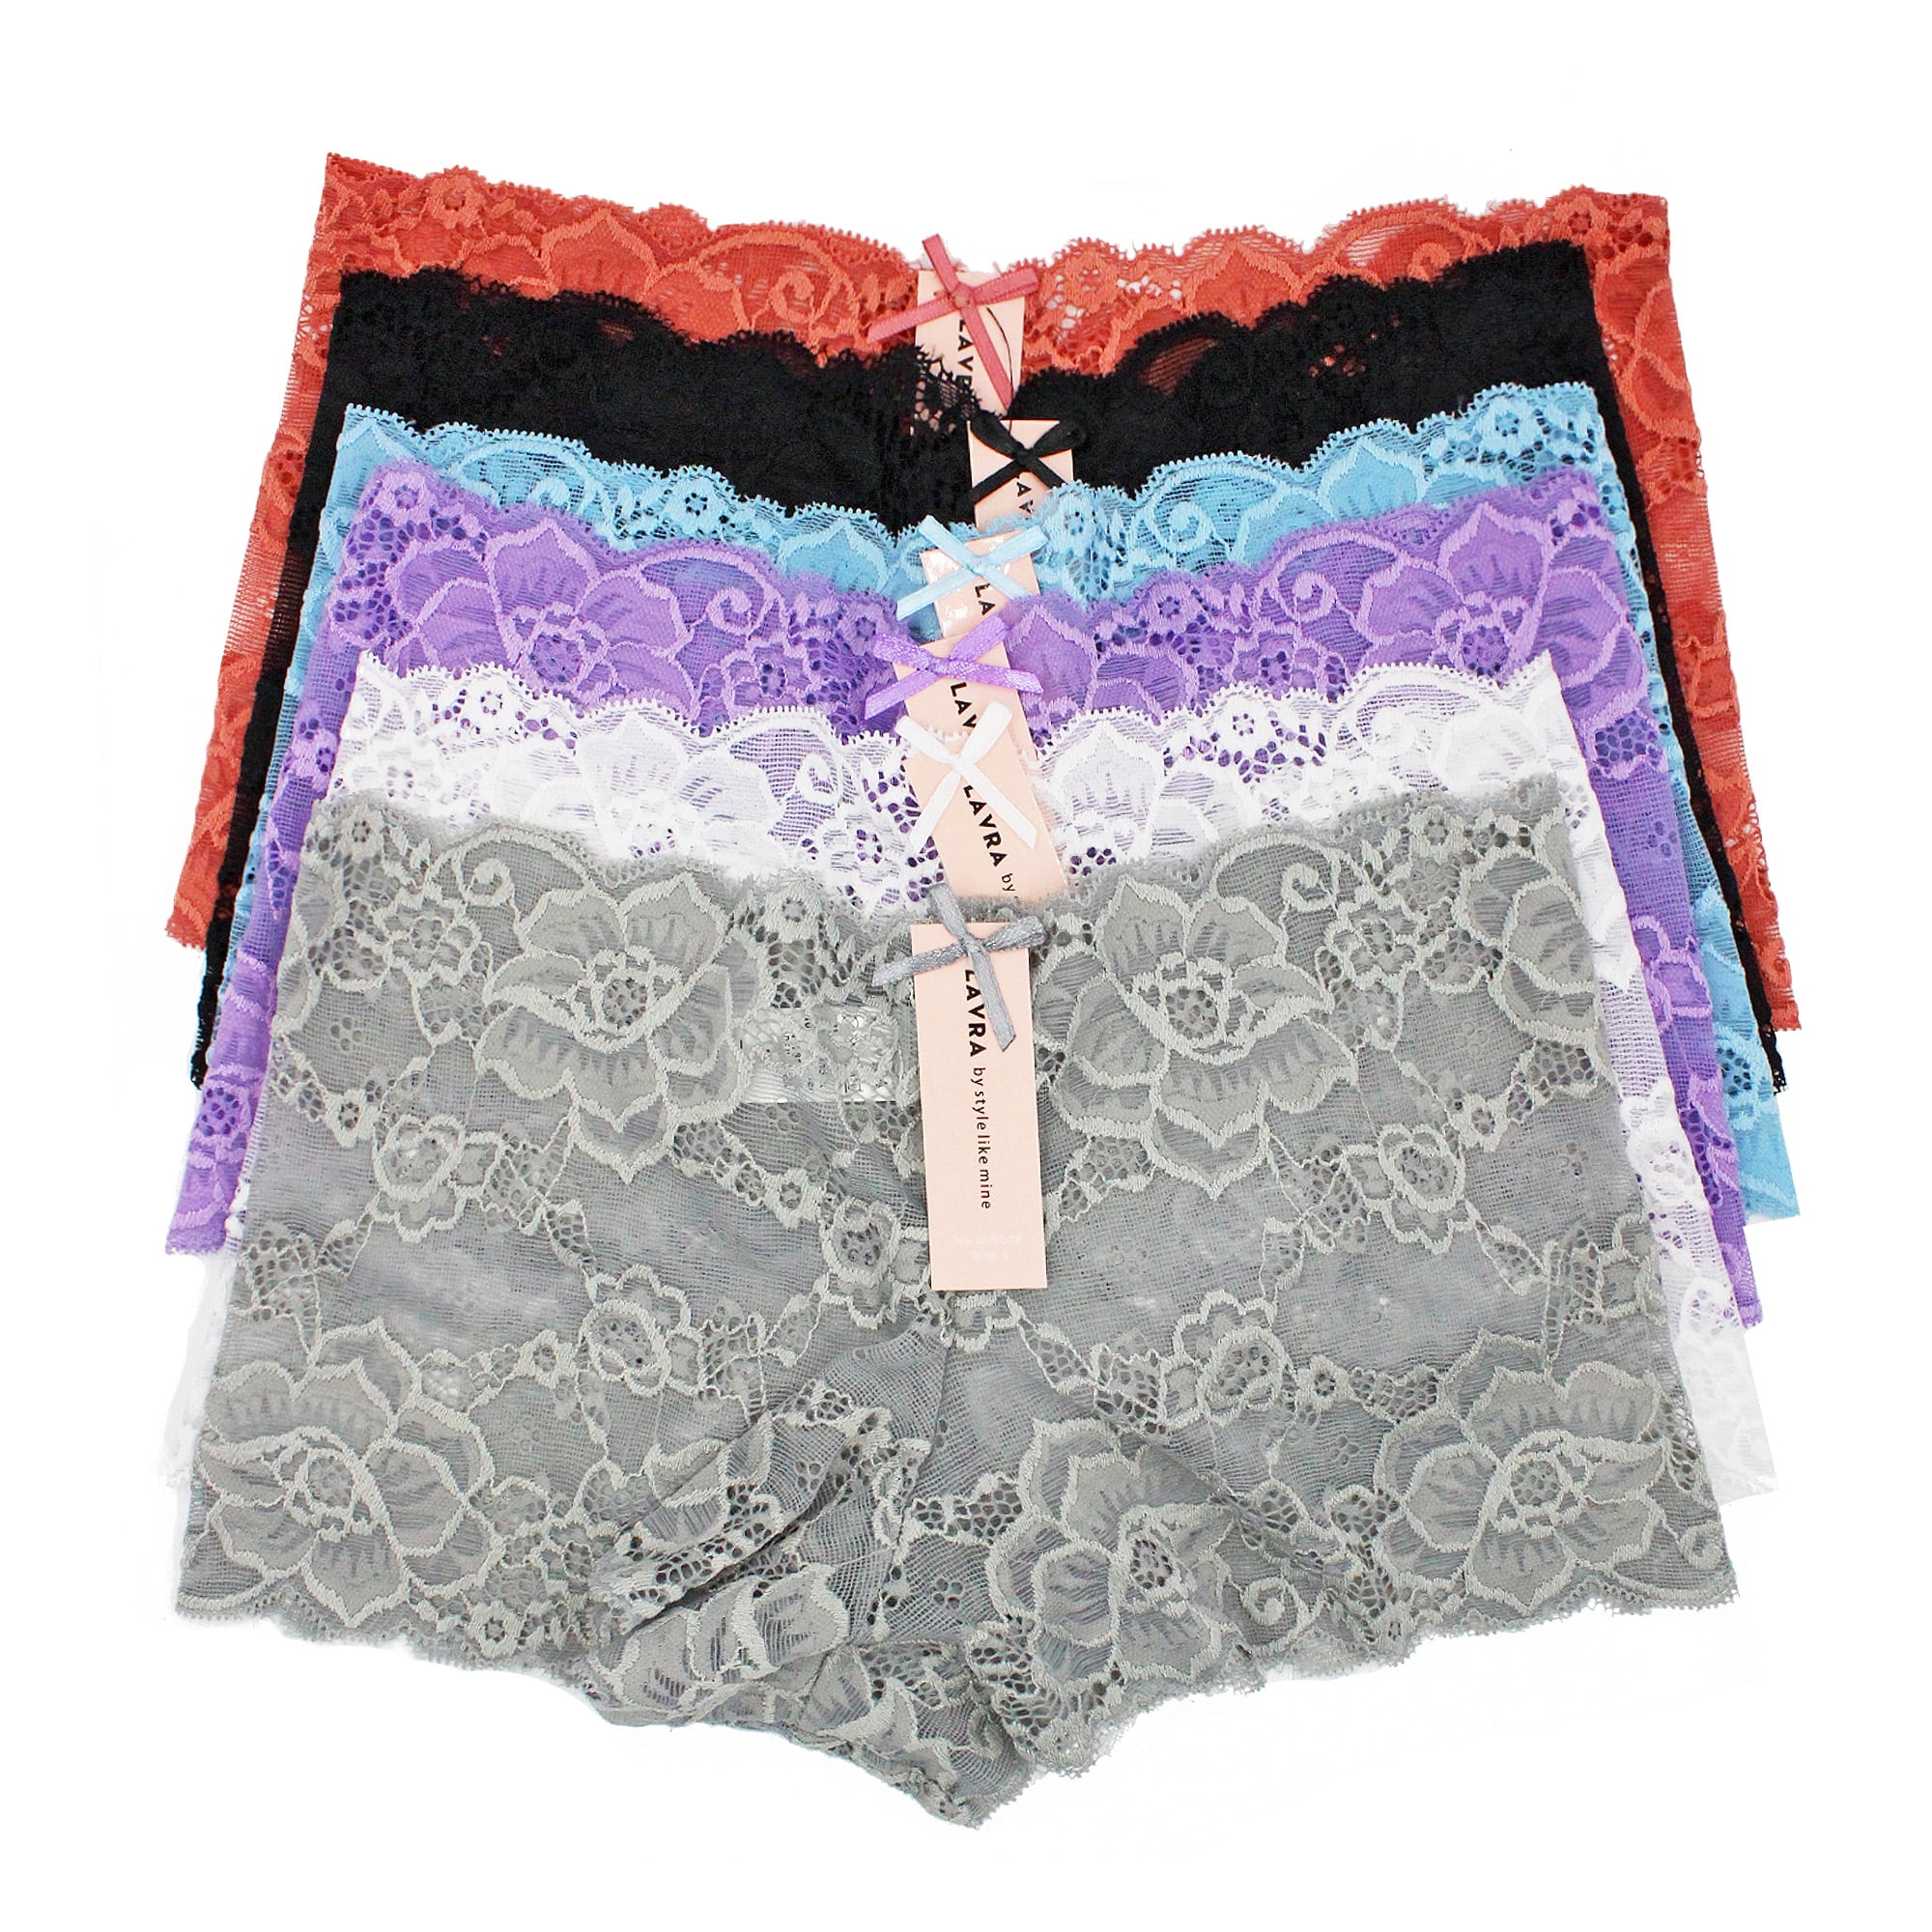 Women Lace Crotchless Knickers Boxer Brief Shorts Panties Underwear Plus Size